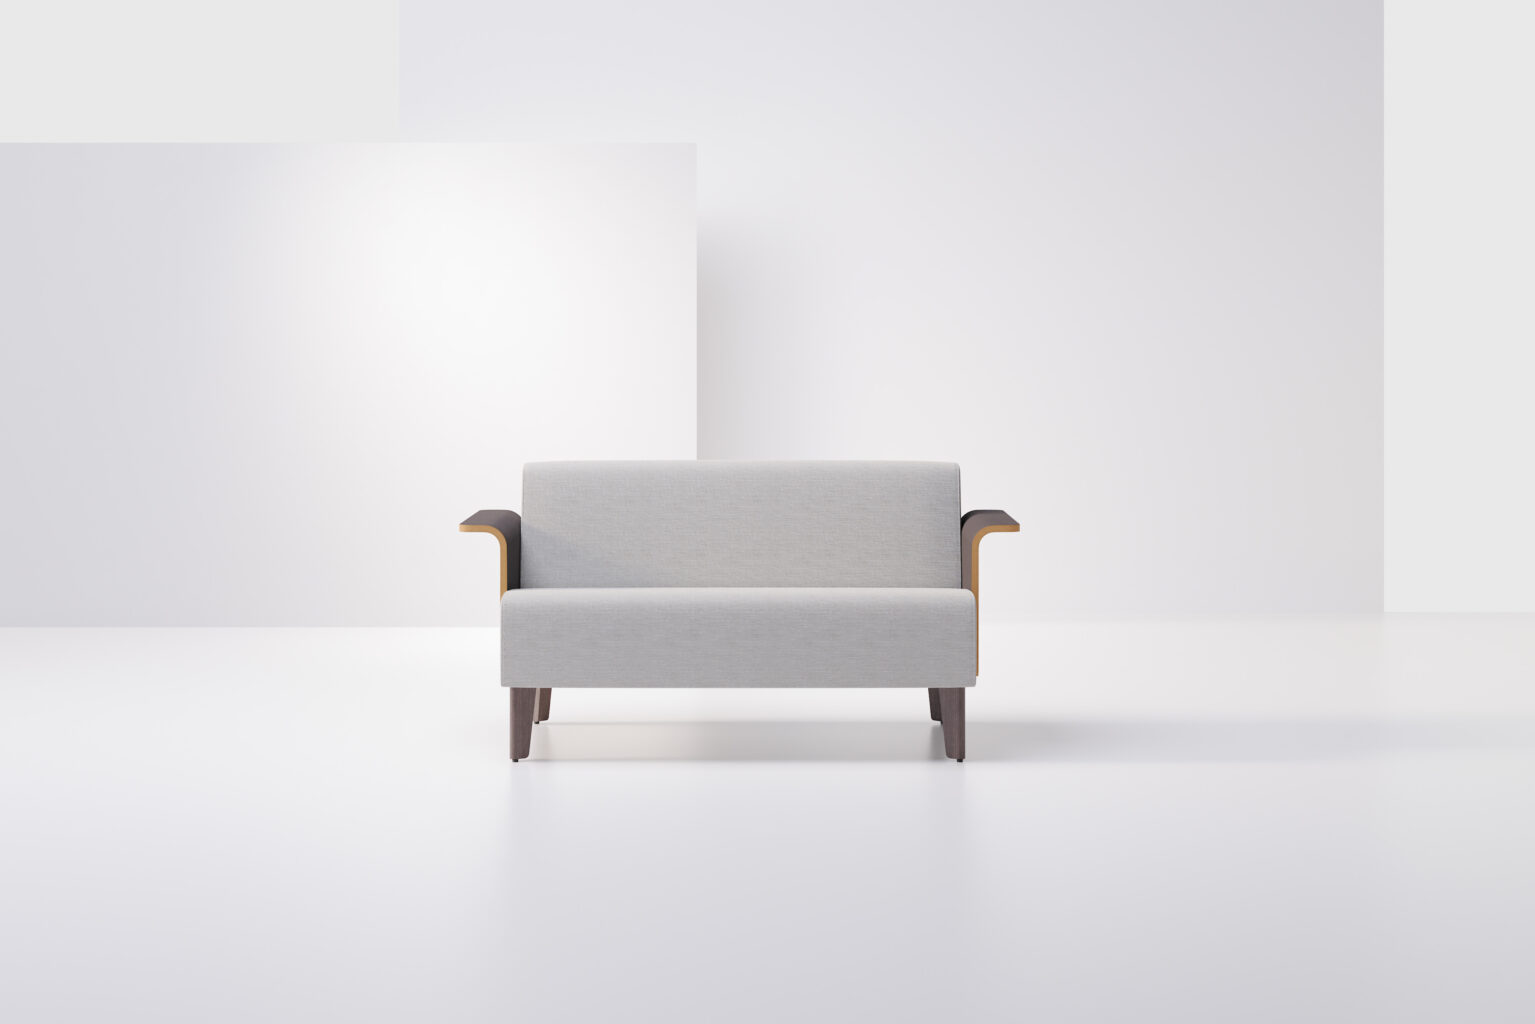 Avila Sofa with Molded Wood Arms Product Image 2